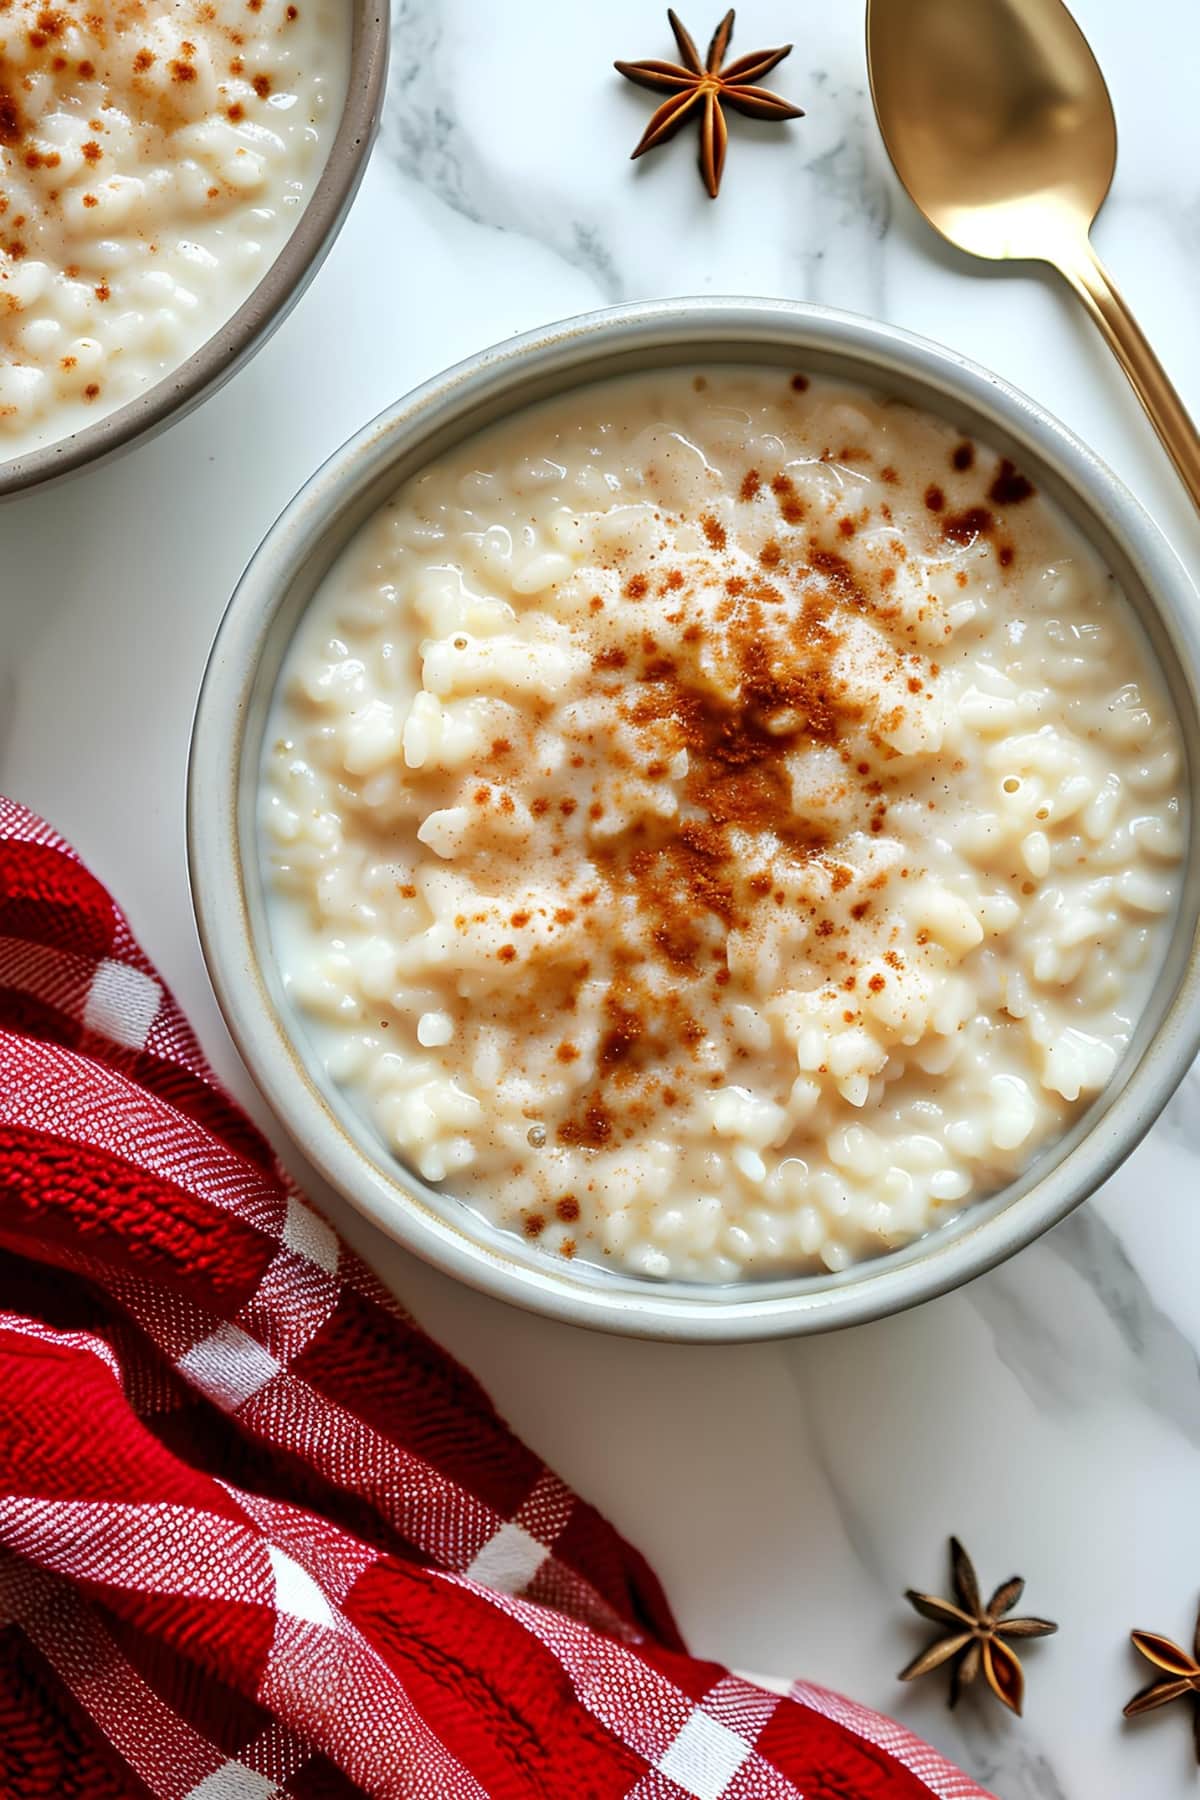 A bowl of homemade mexican rice pudding with a sprinkle of cinnamon